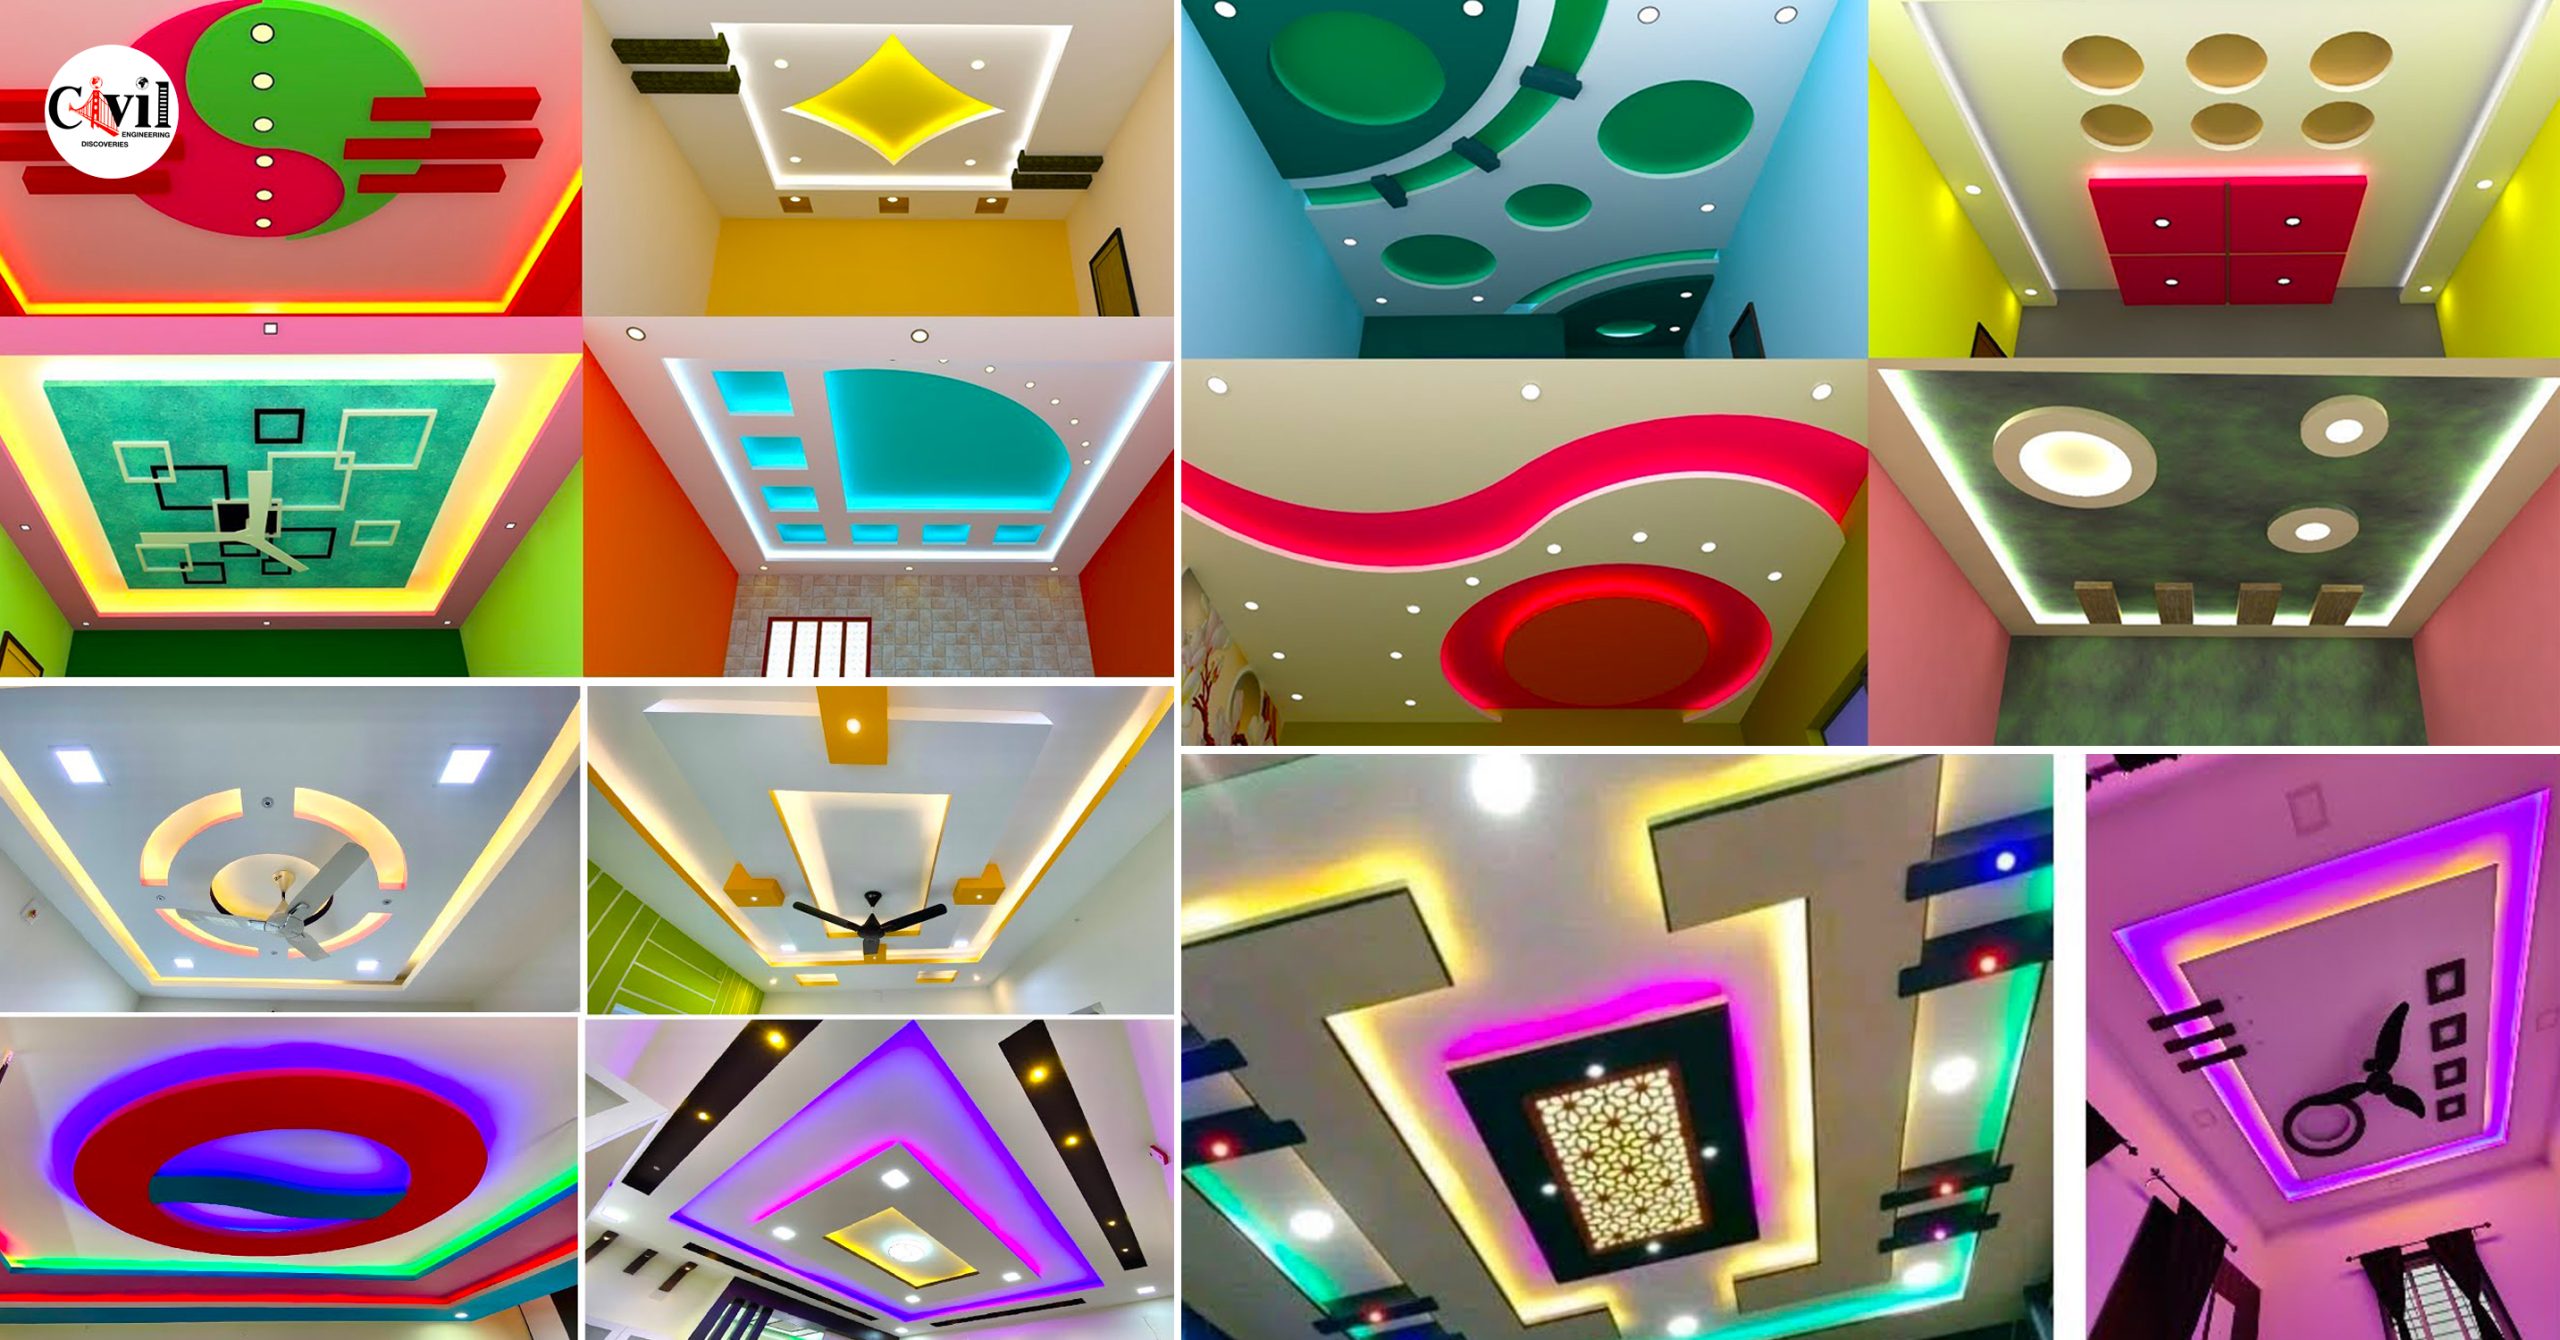 21 Incredible Detailed Ceiling Design Ideas From EXPERTS